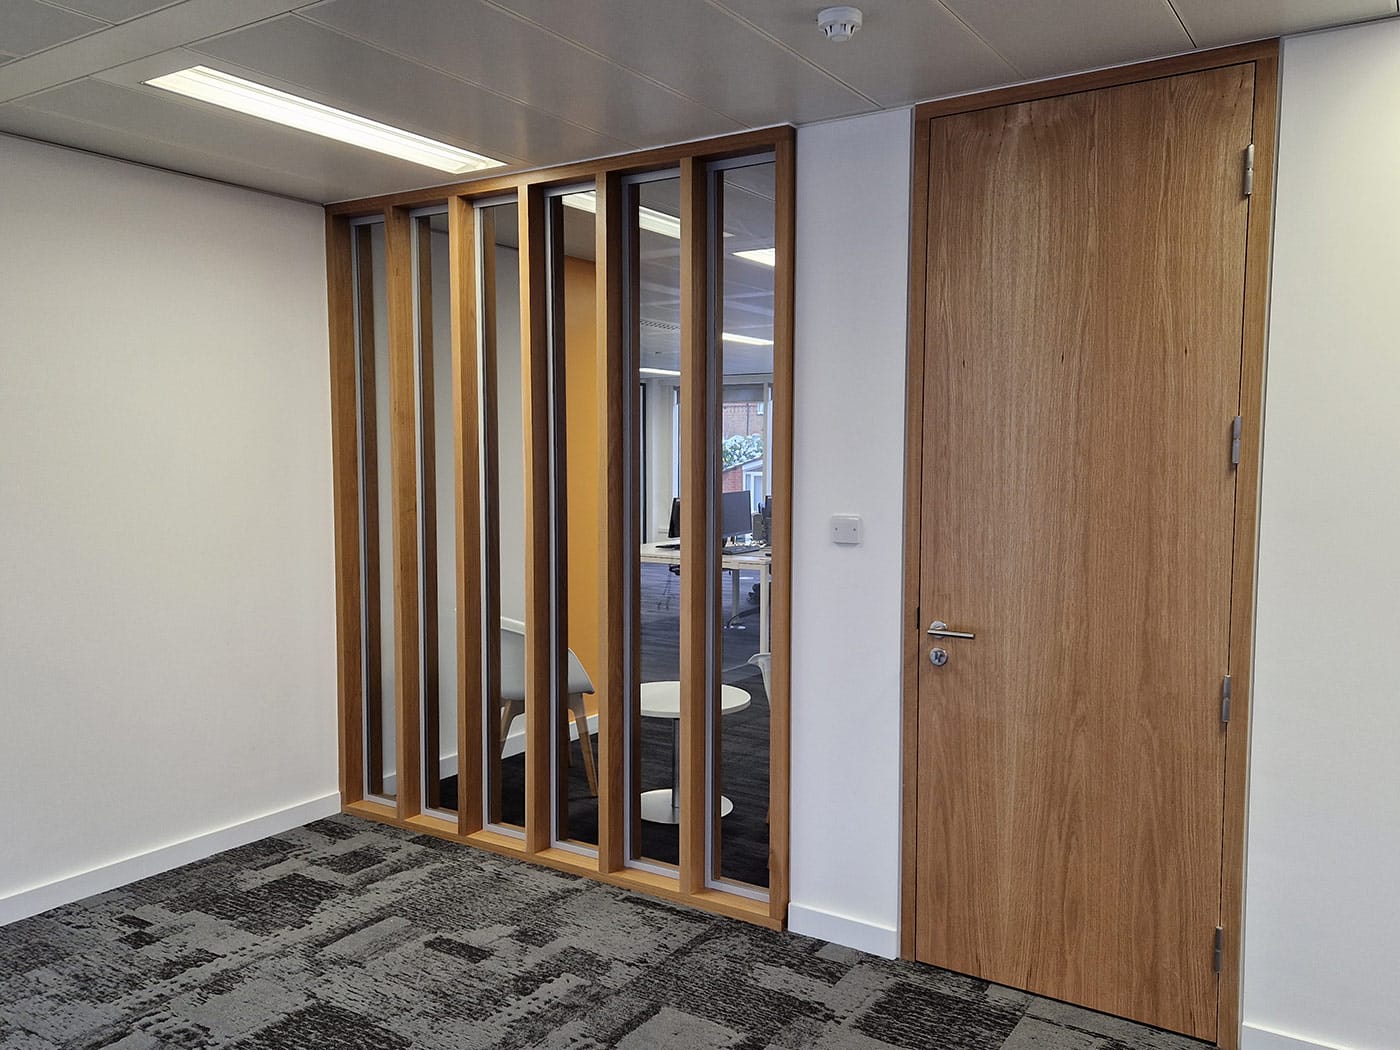 RSPCA Offices by TMP Interiors